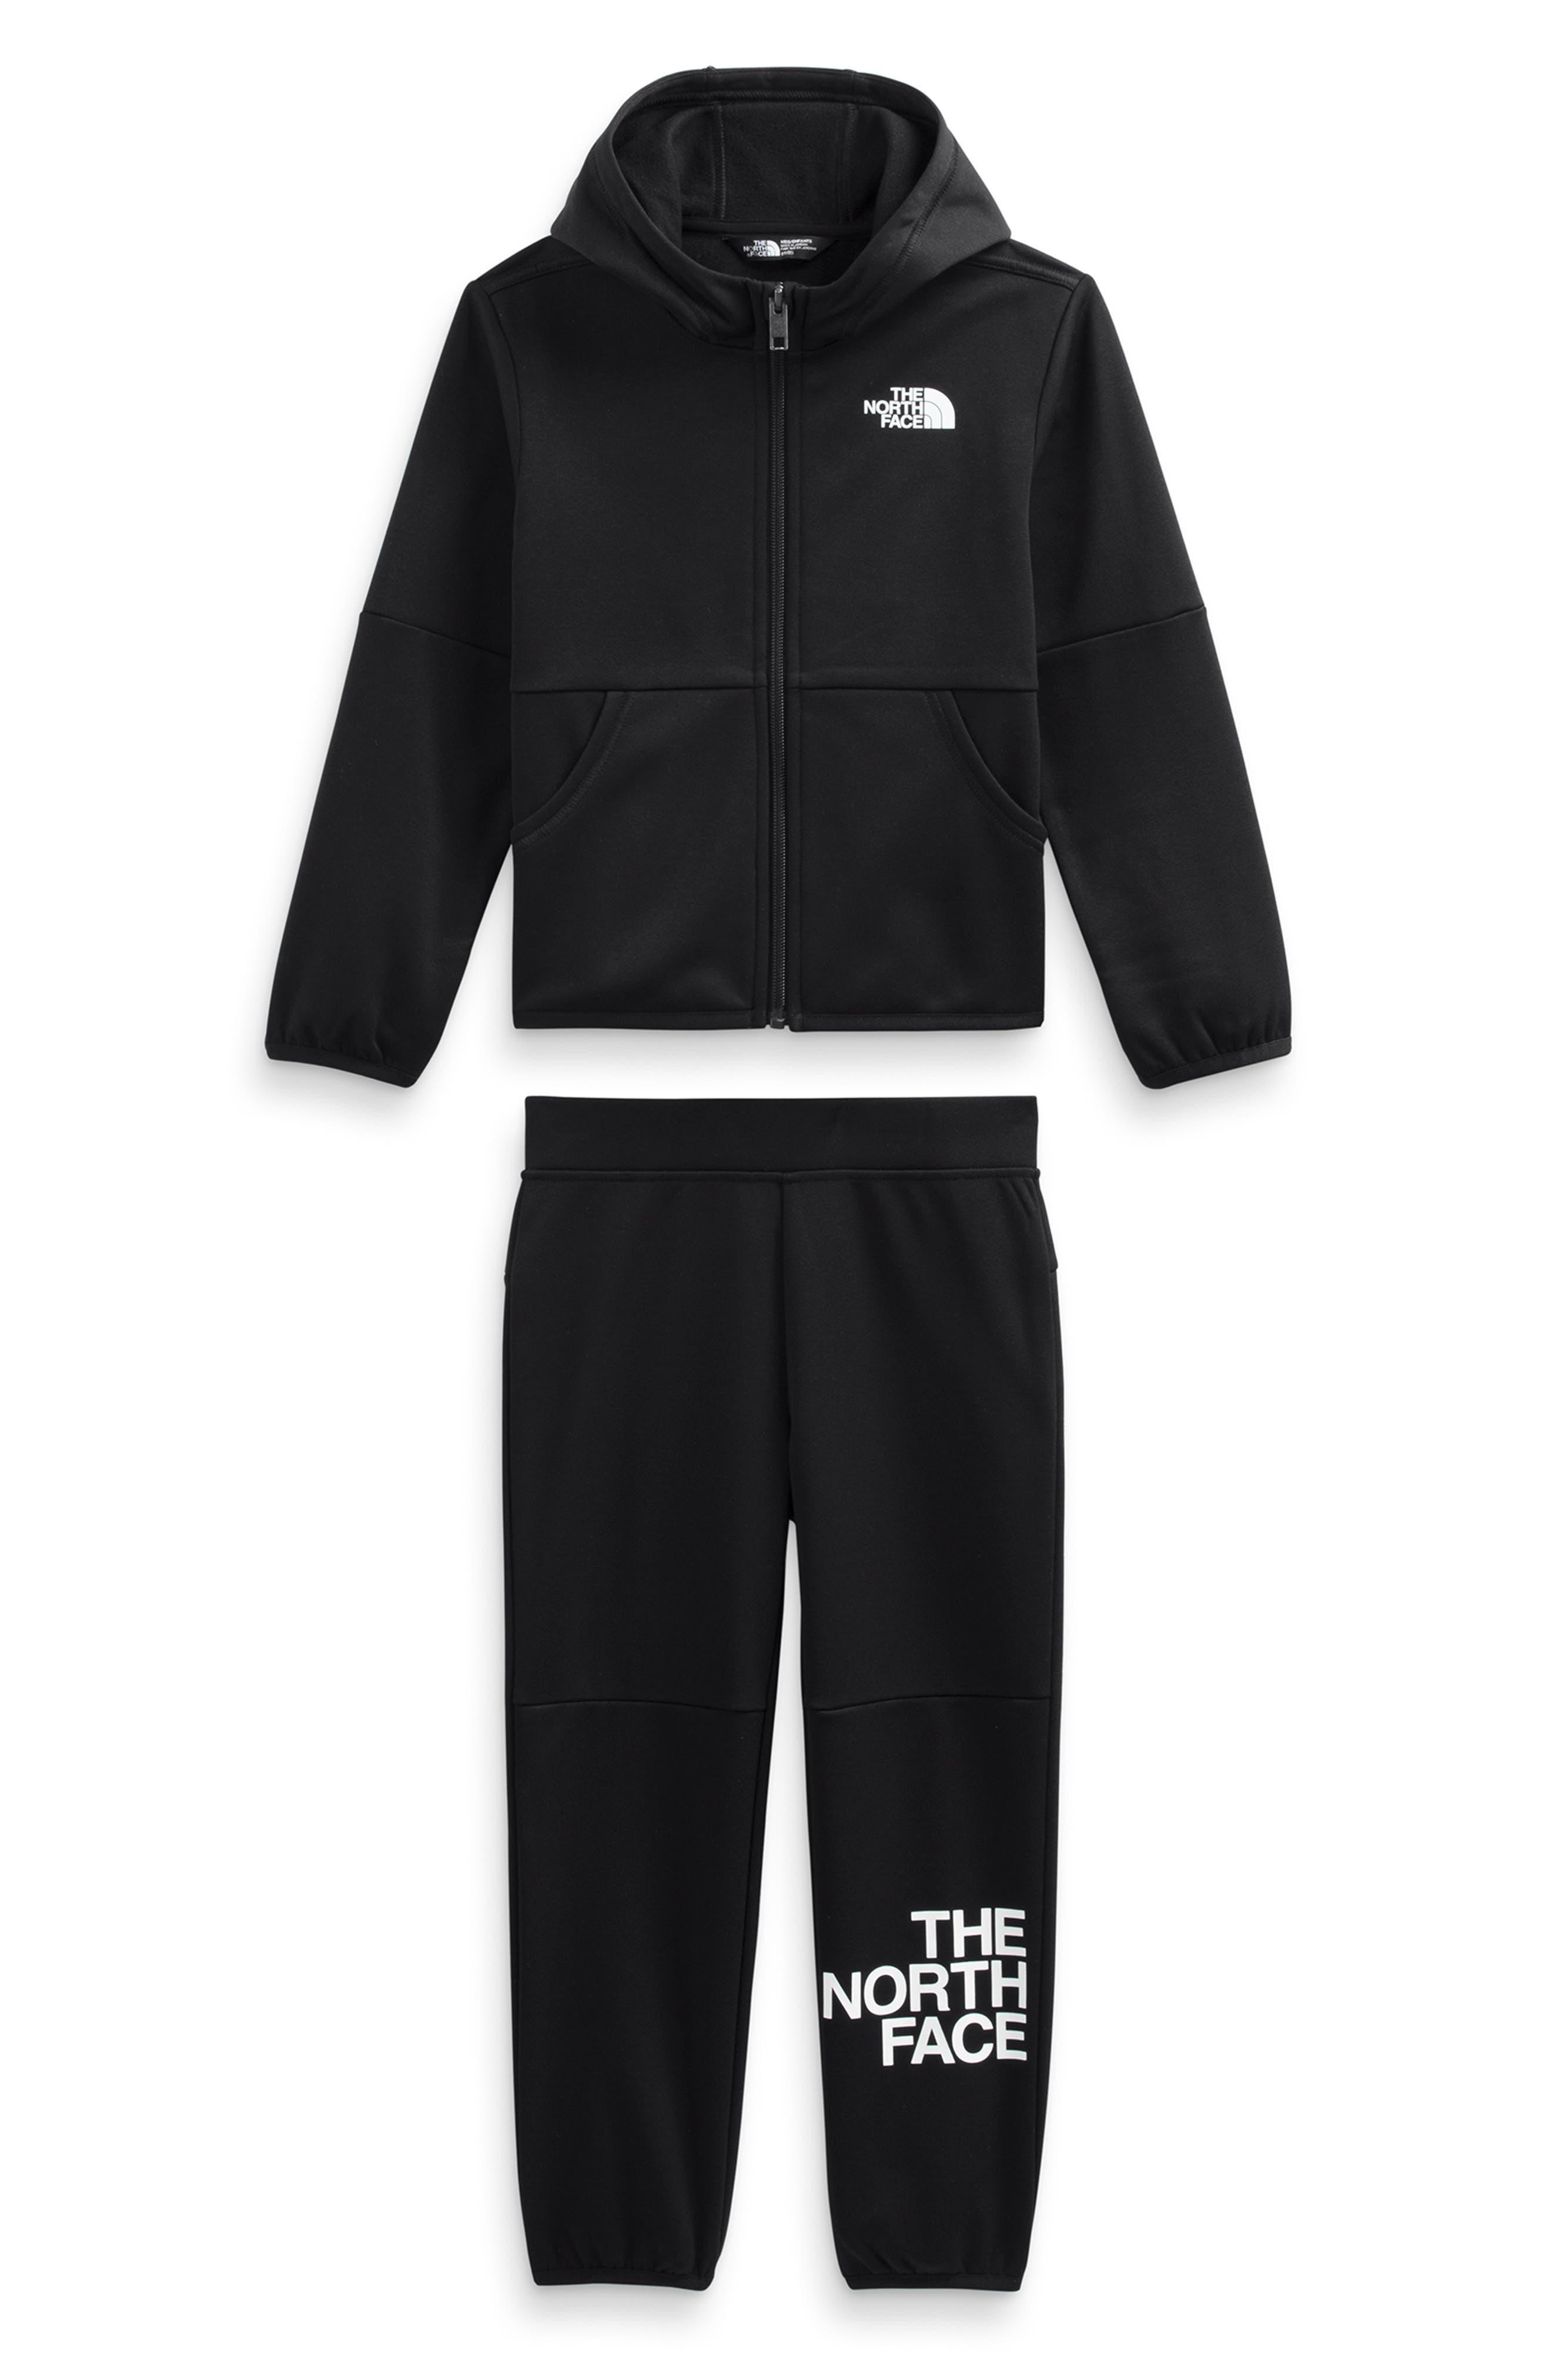 The North Face Kids' Winter Warm Hoodie & Pants Set in Black for